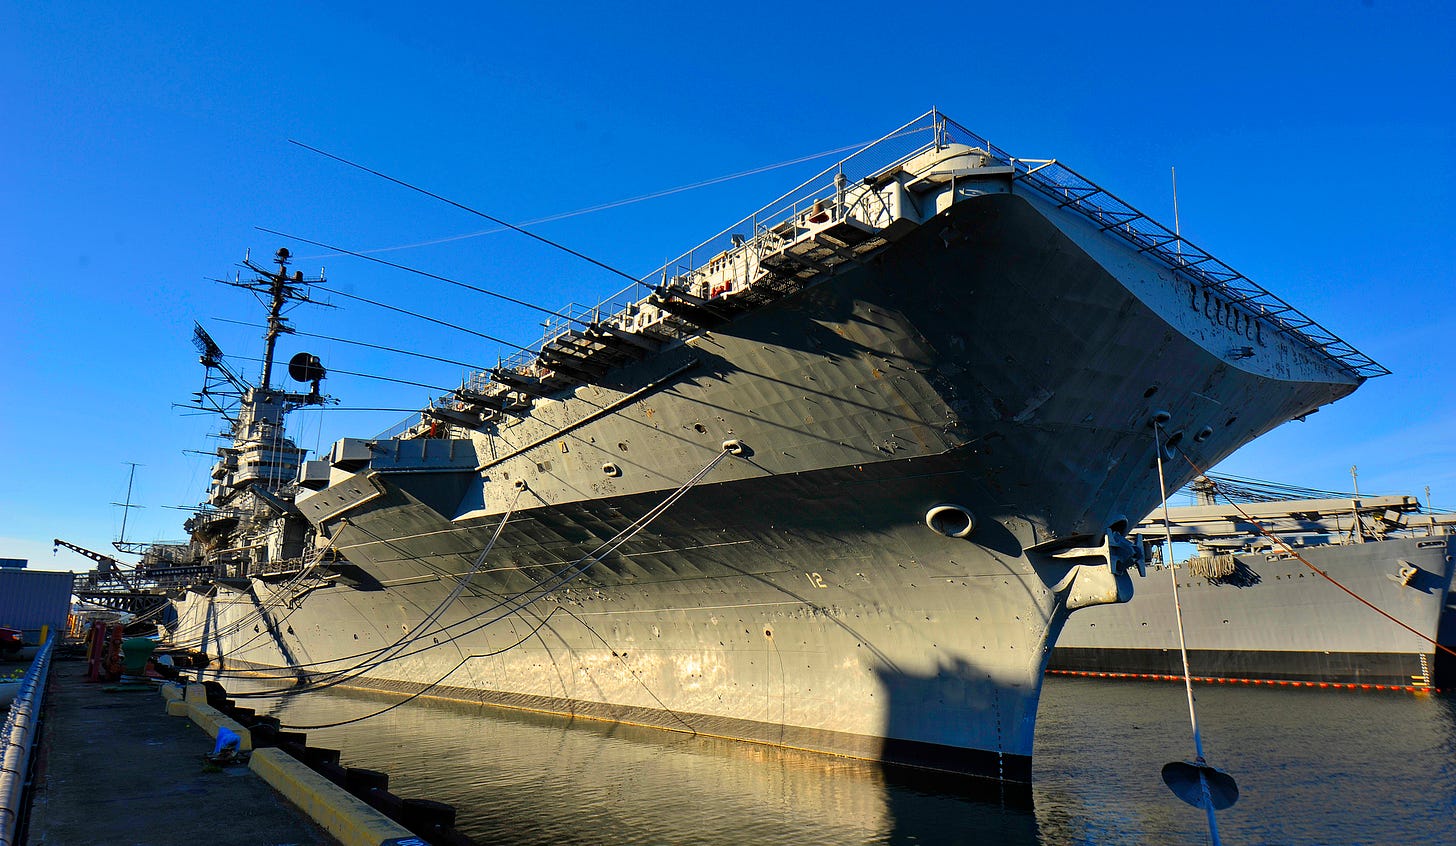 The retired aircraft carrier Hornet juts into the frame against a bright blue sky.